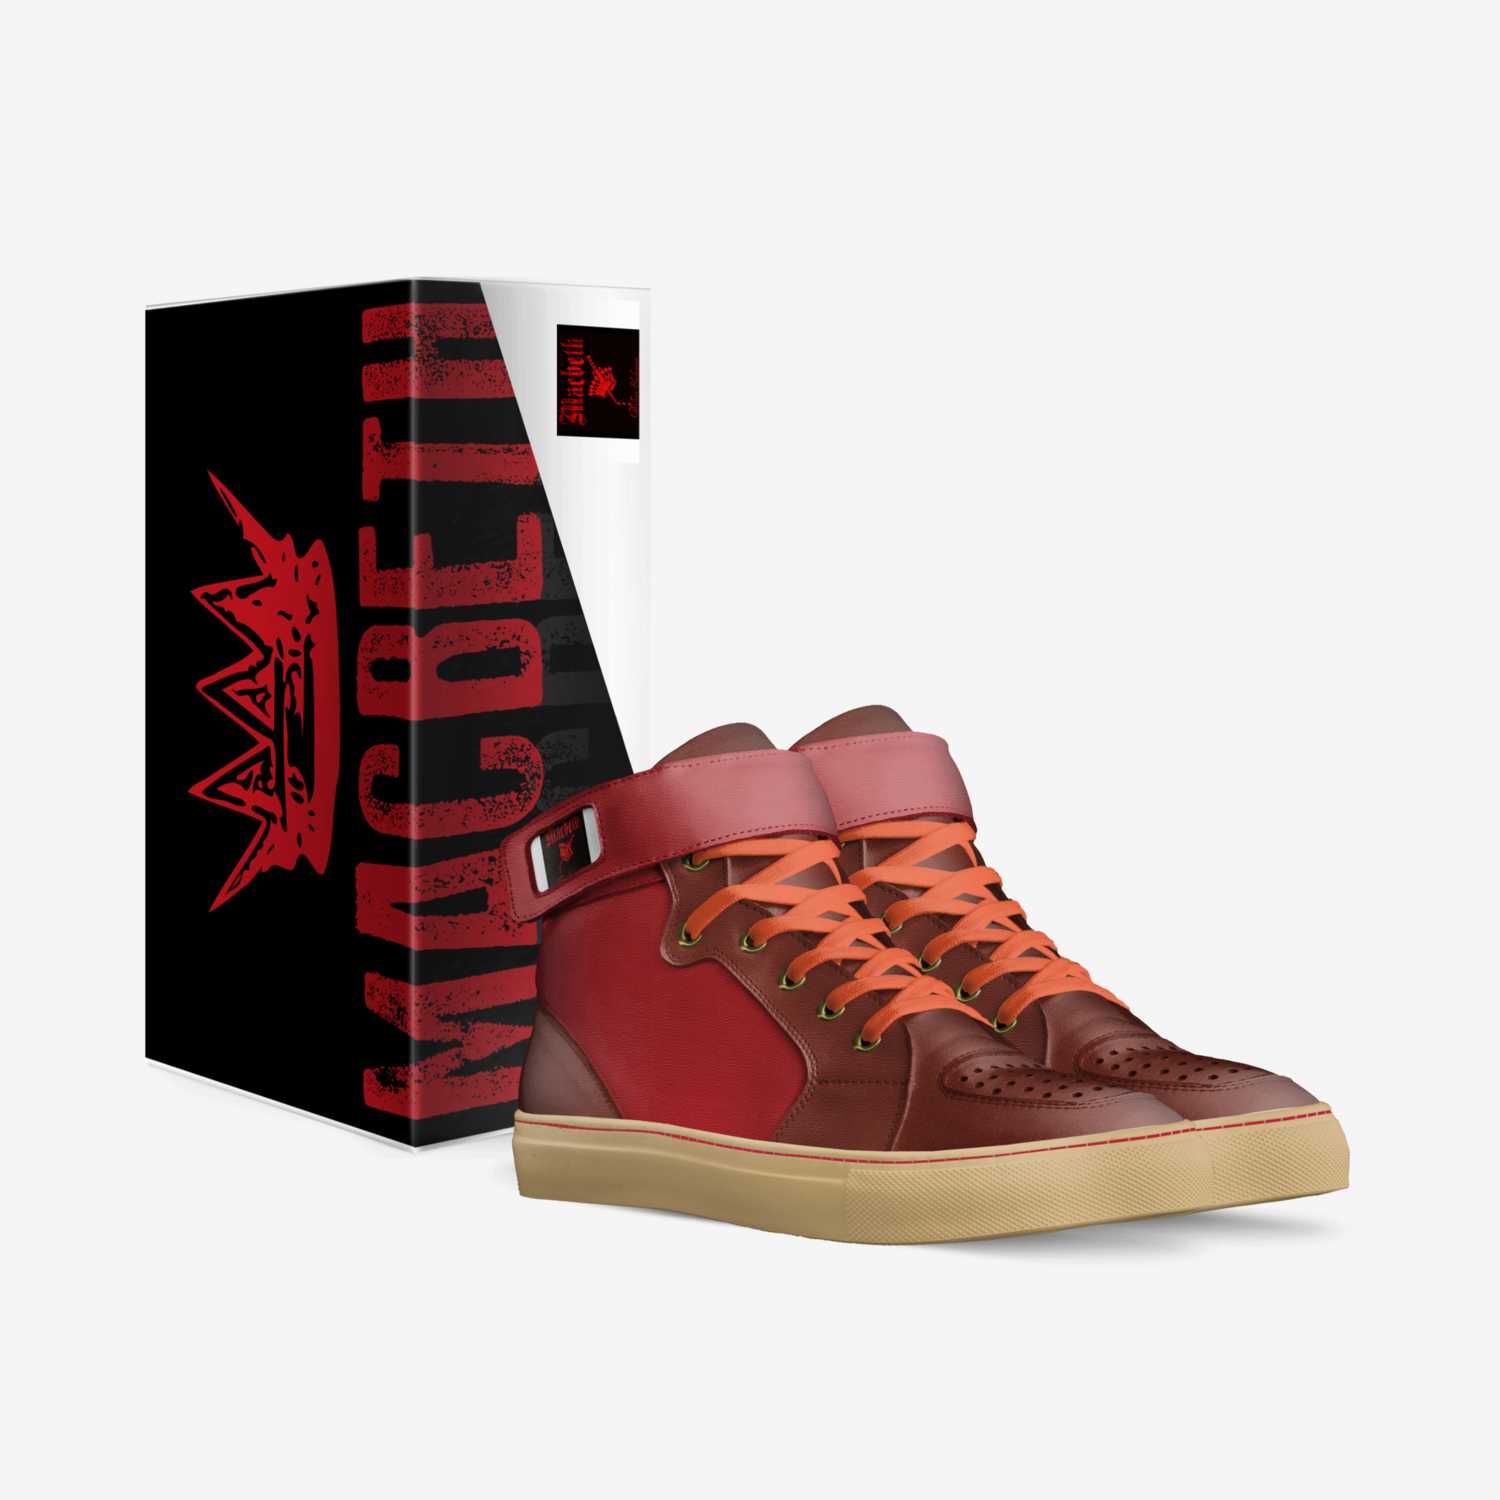 HiTopDaggers custom made in Italy shoes by Jordan Tchorlian | Box view